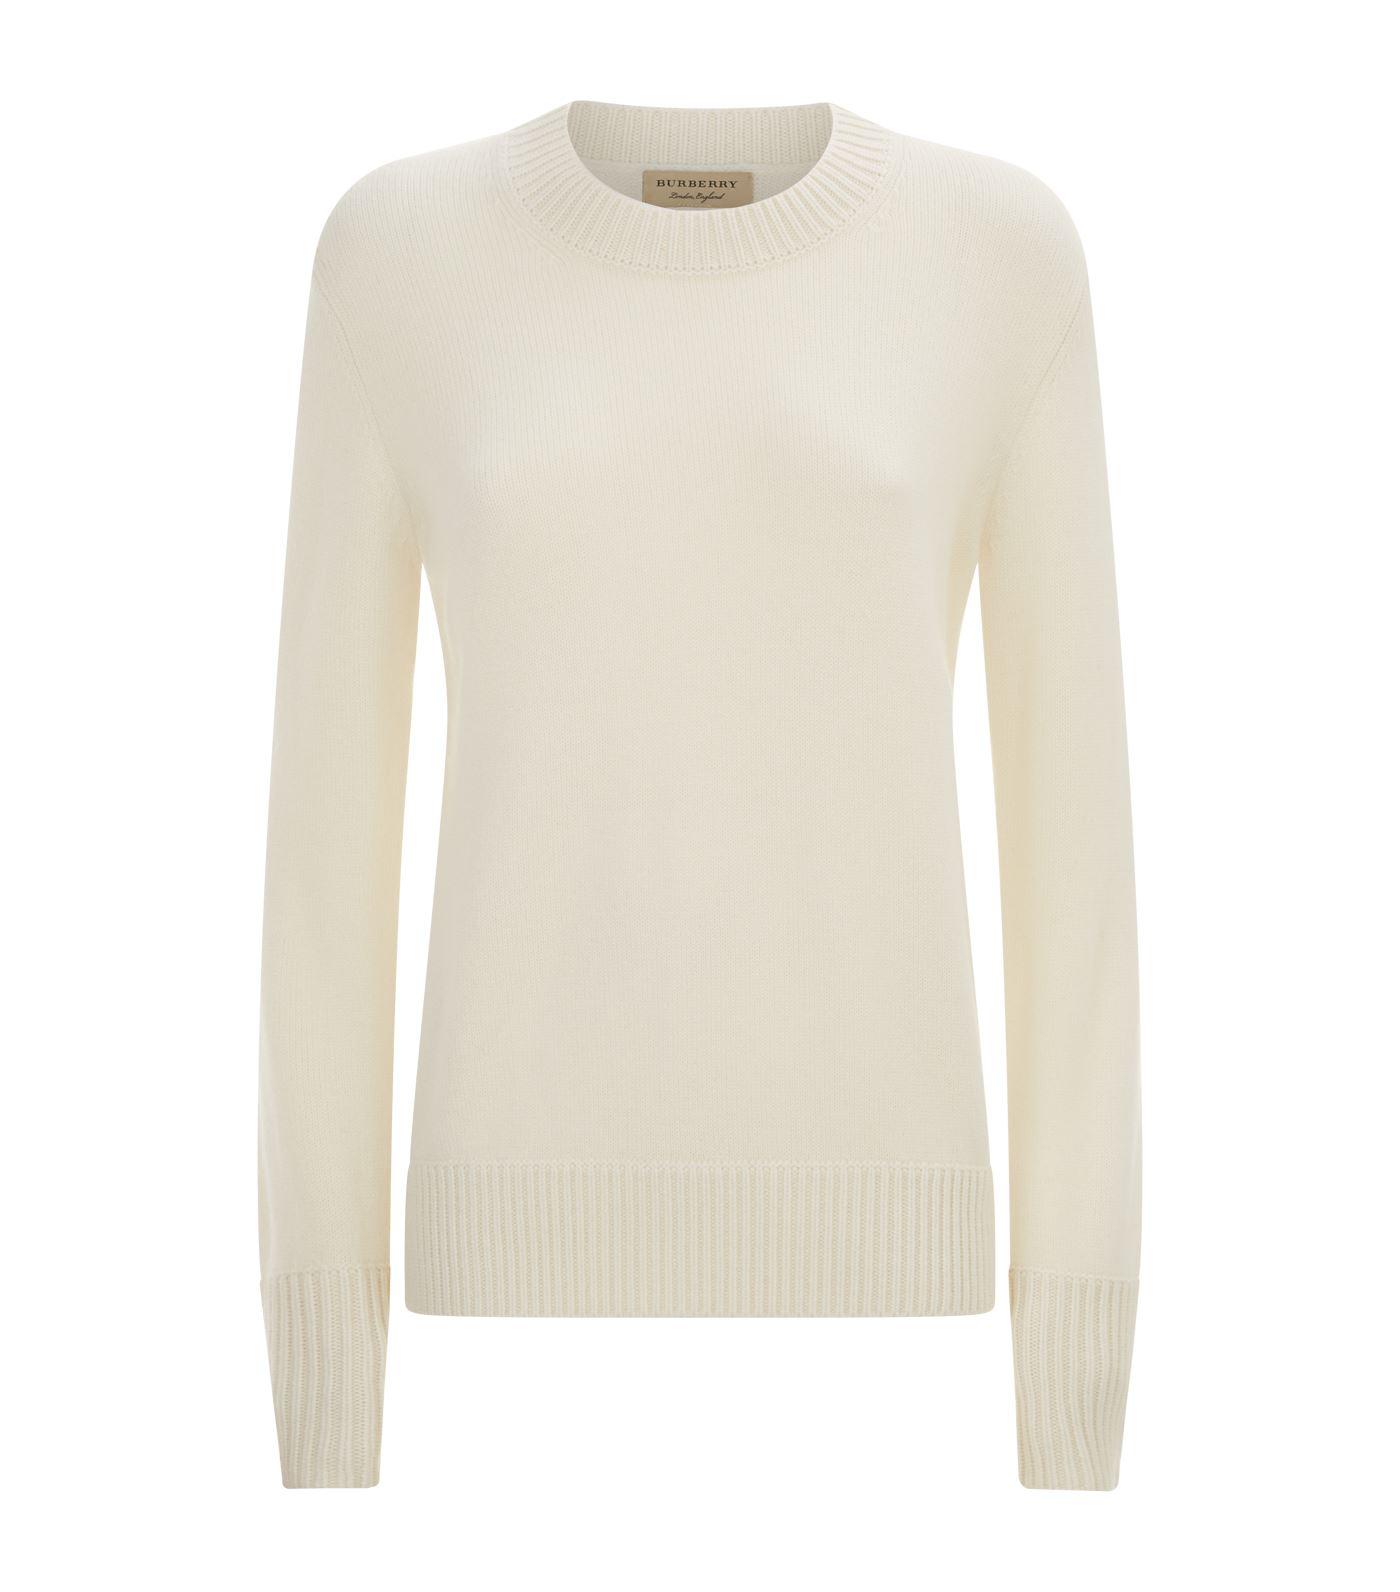 Burberry Cashmere Archive Logo Crew Neck Sweater in White - Lyst